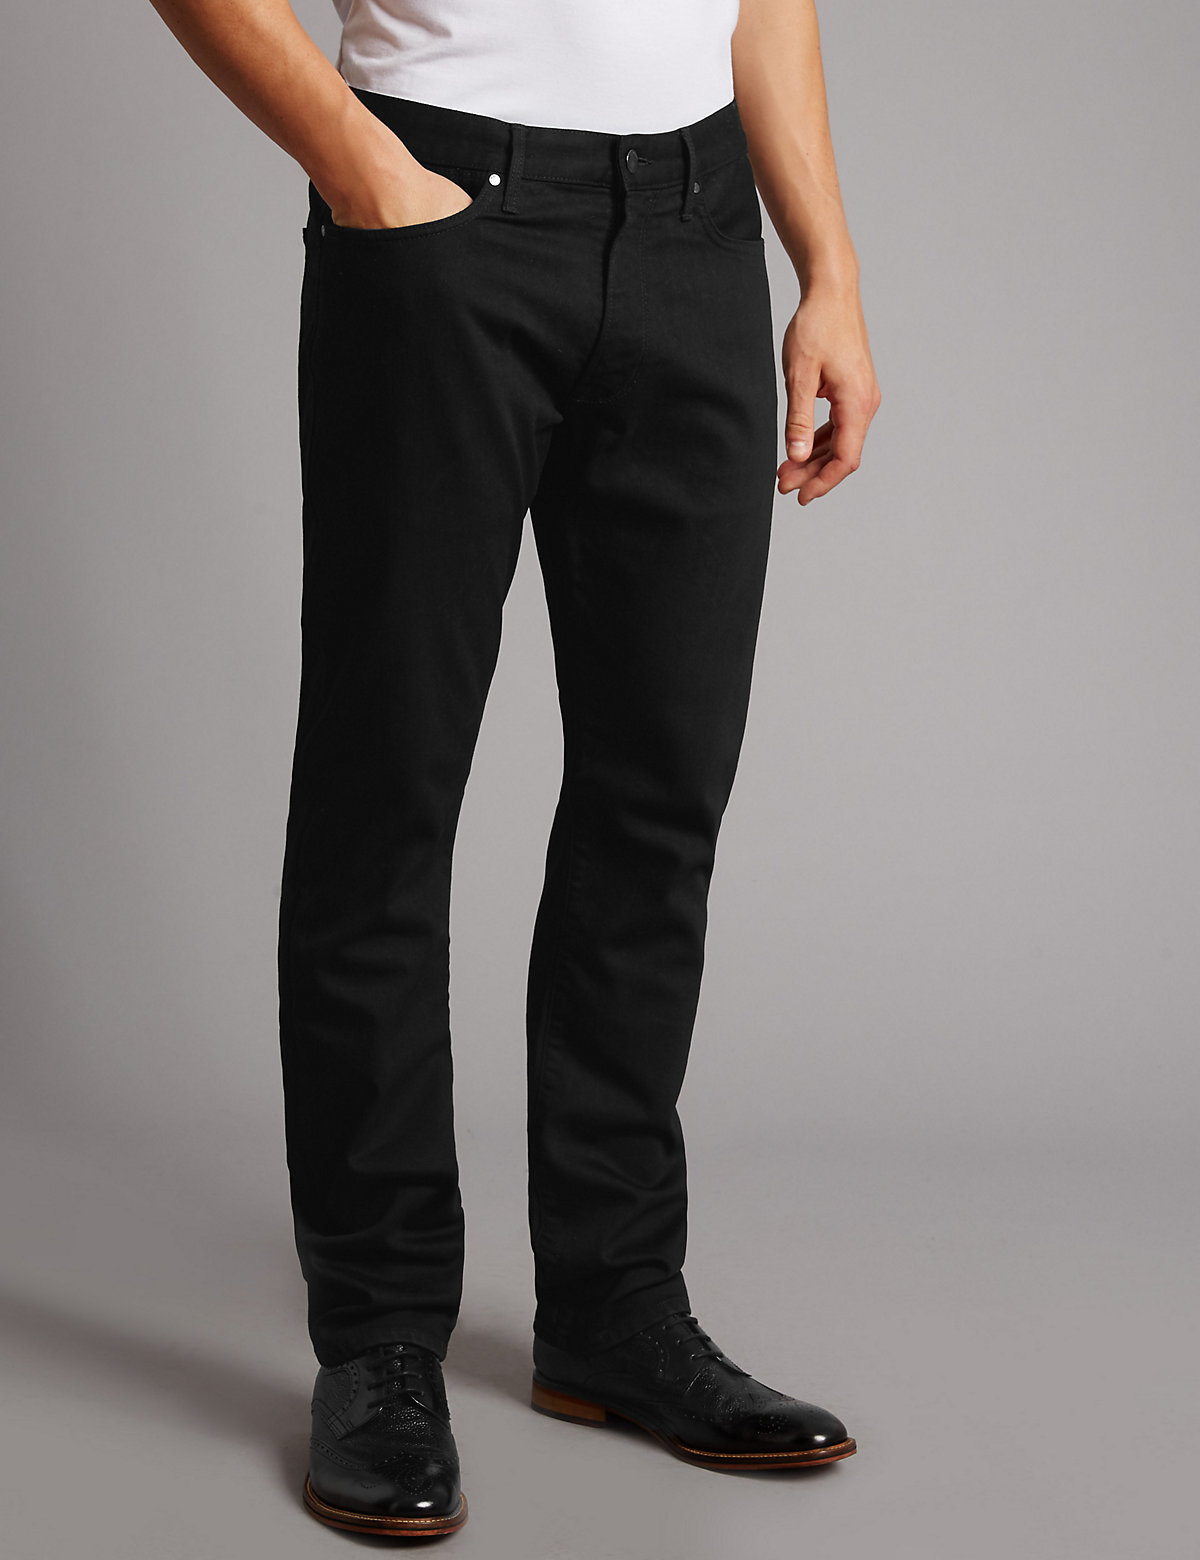 M&S Collection Big & Tall Slim Fit Stretch Jeans | Bluewater | £10.99